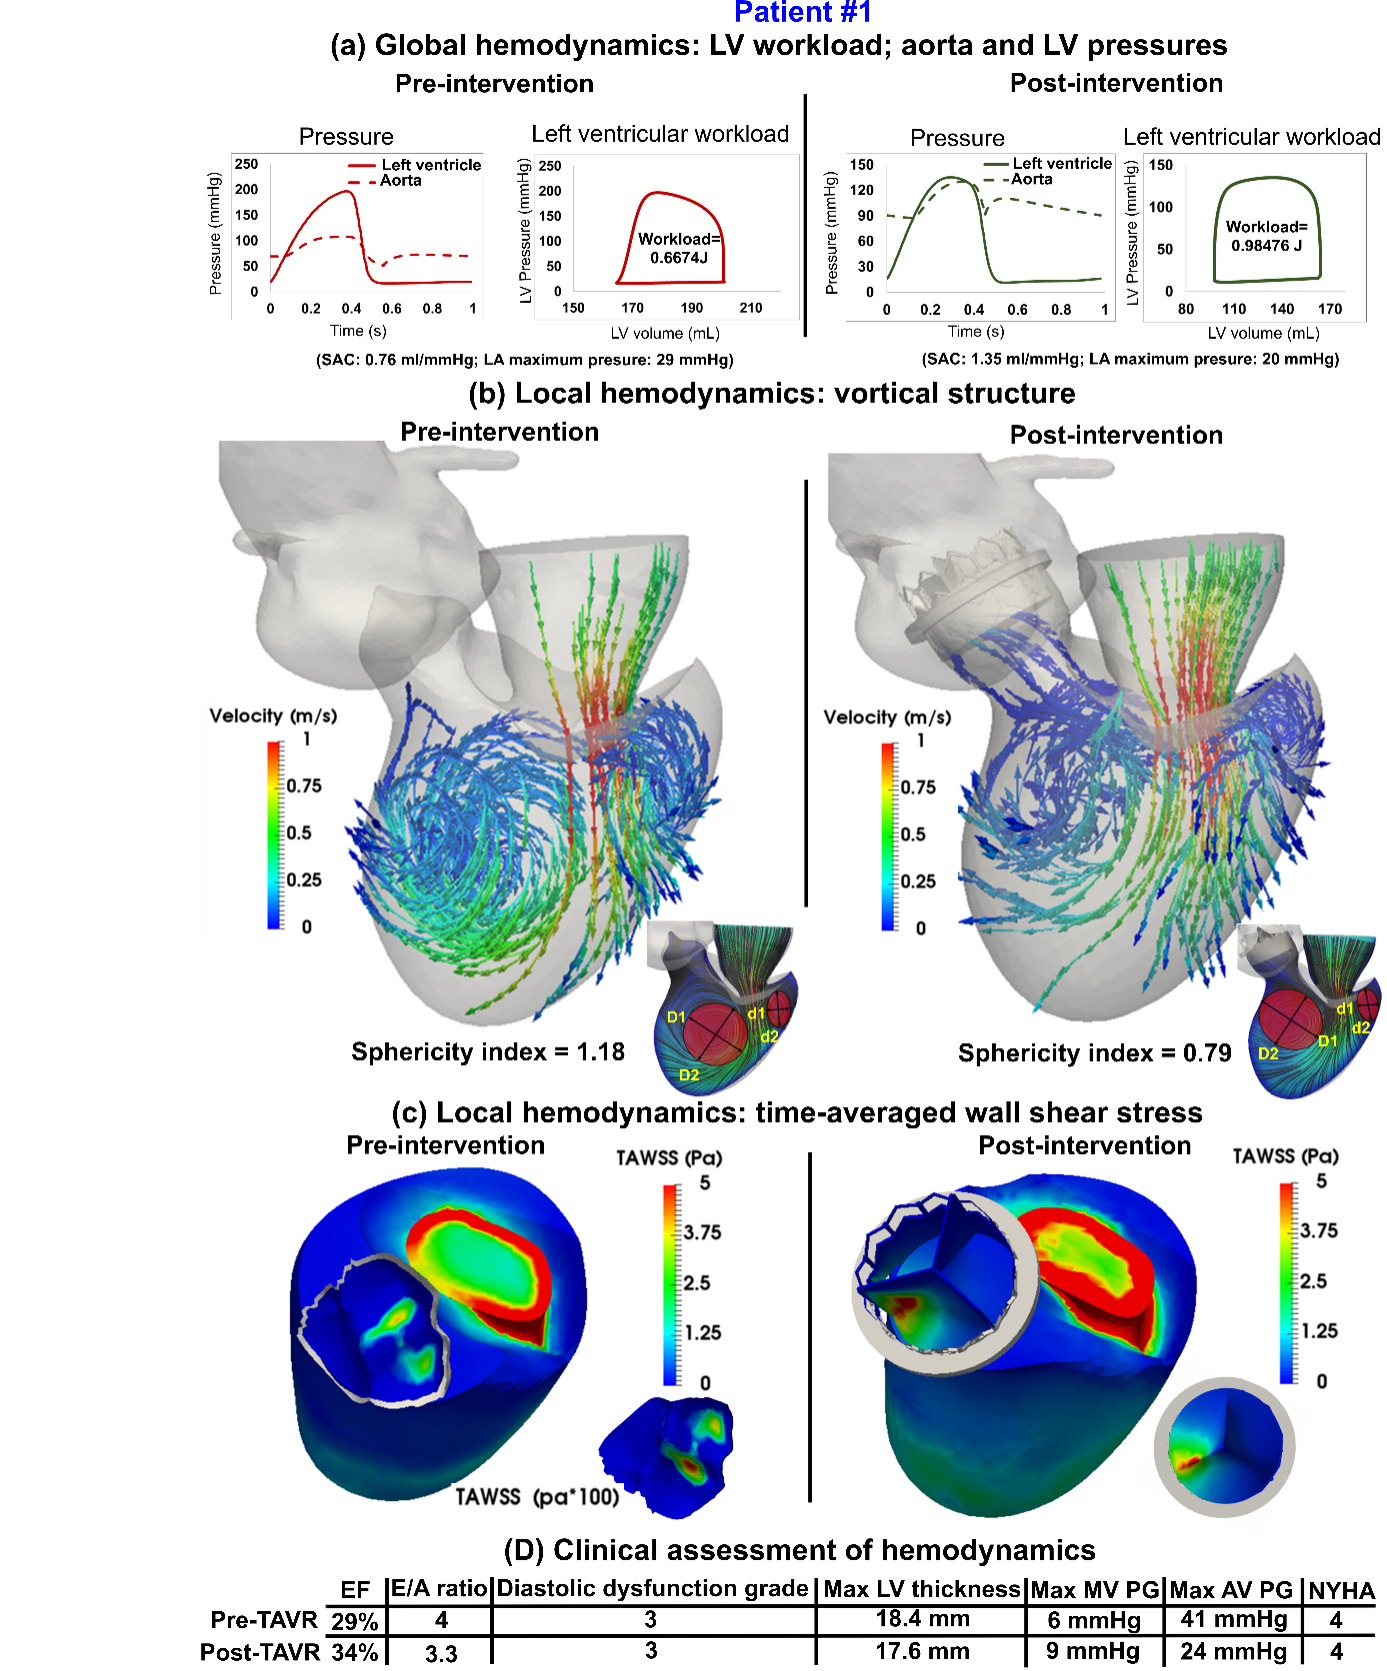 Figure 1. Simulation of the heart in patients with valvular disease and transcatheter aortic valve replacement.